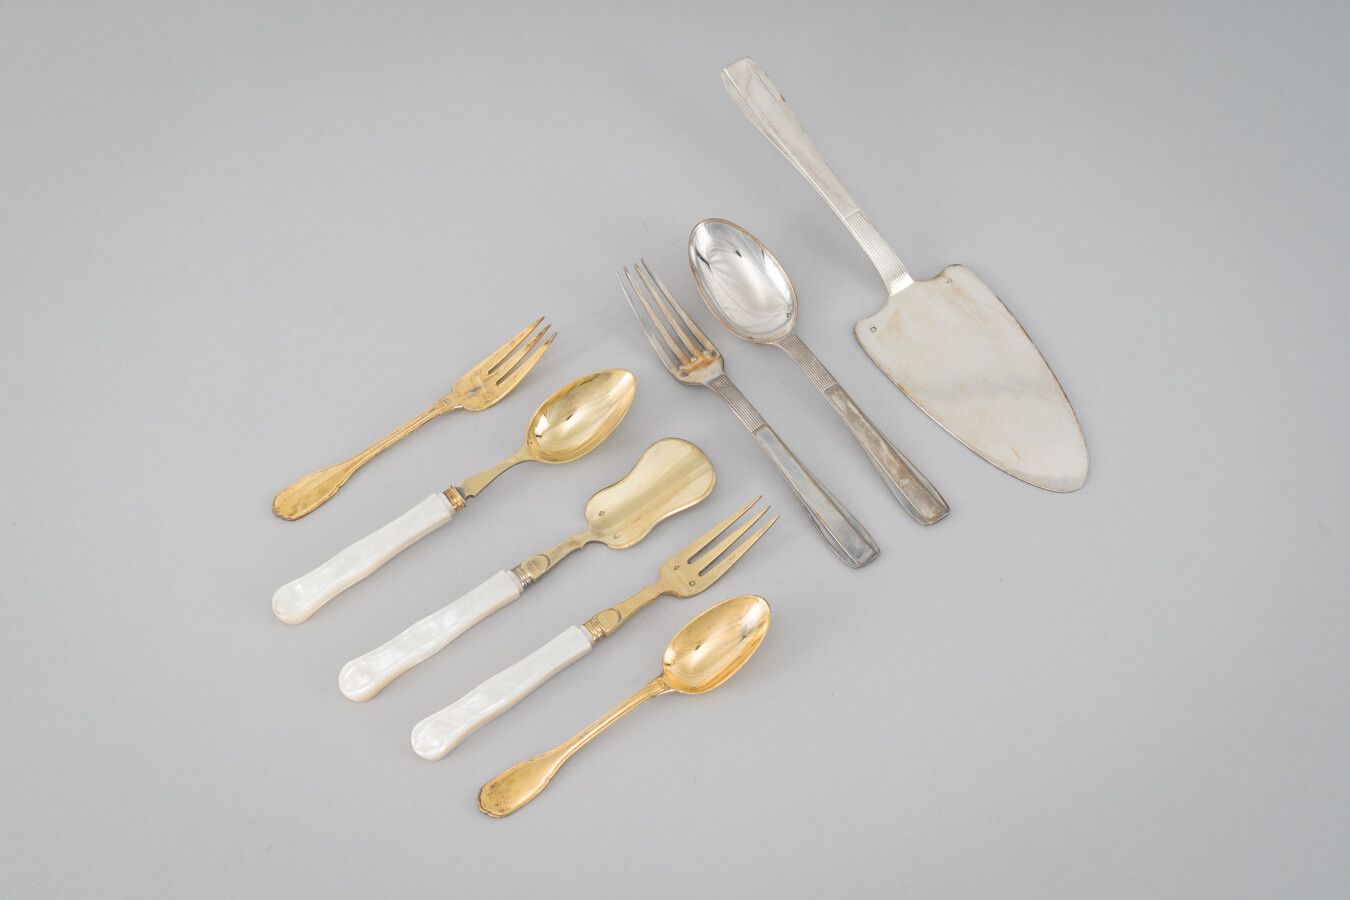 Null Silver set (950/1000th), including :

- A pie server and a dessert server (&hellip;